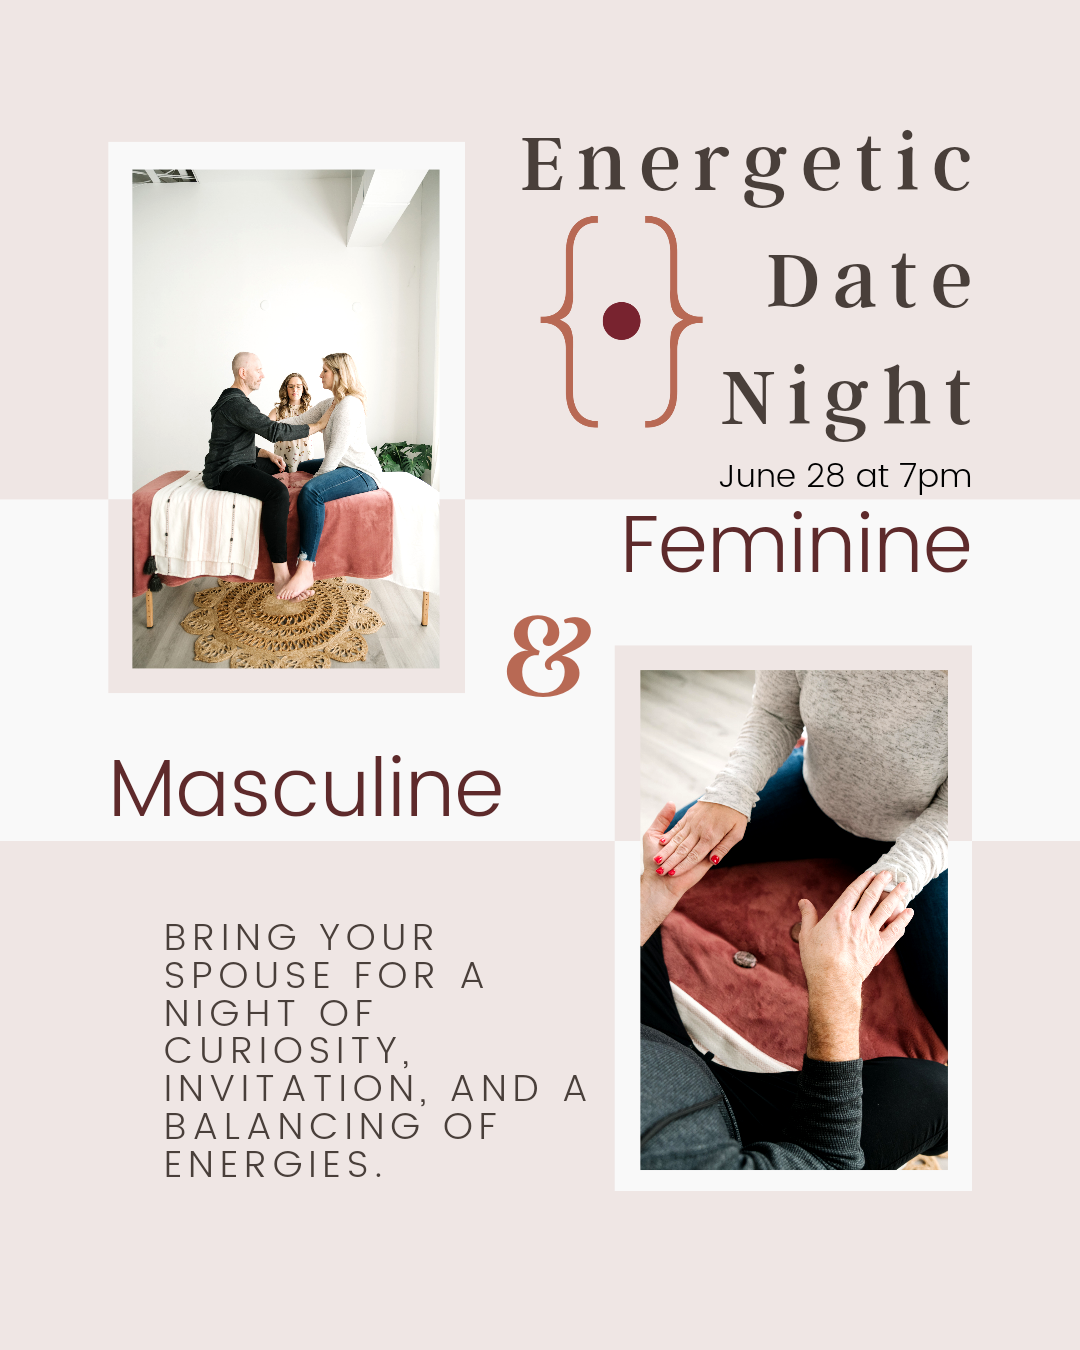 Get in touch with your energy and sexuality with these classes